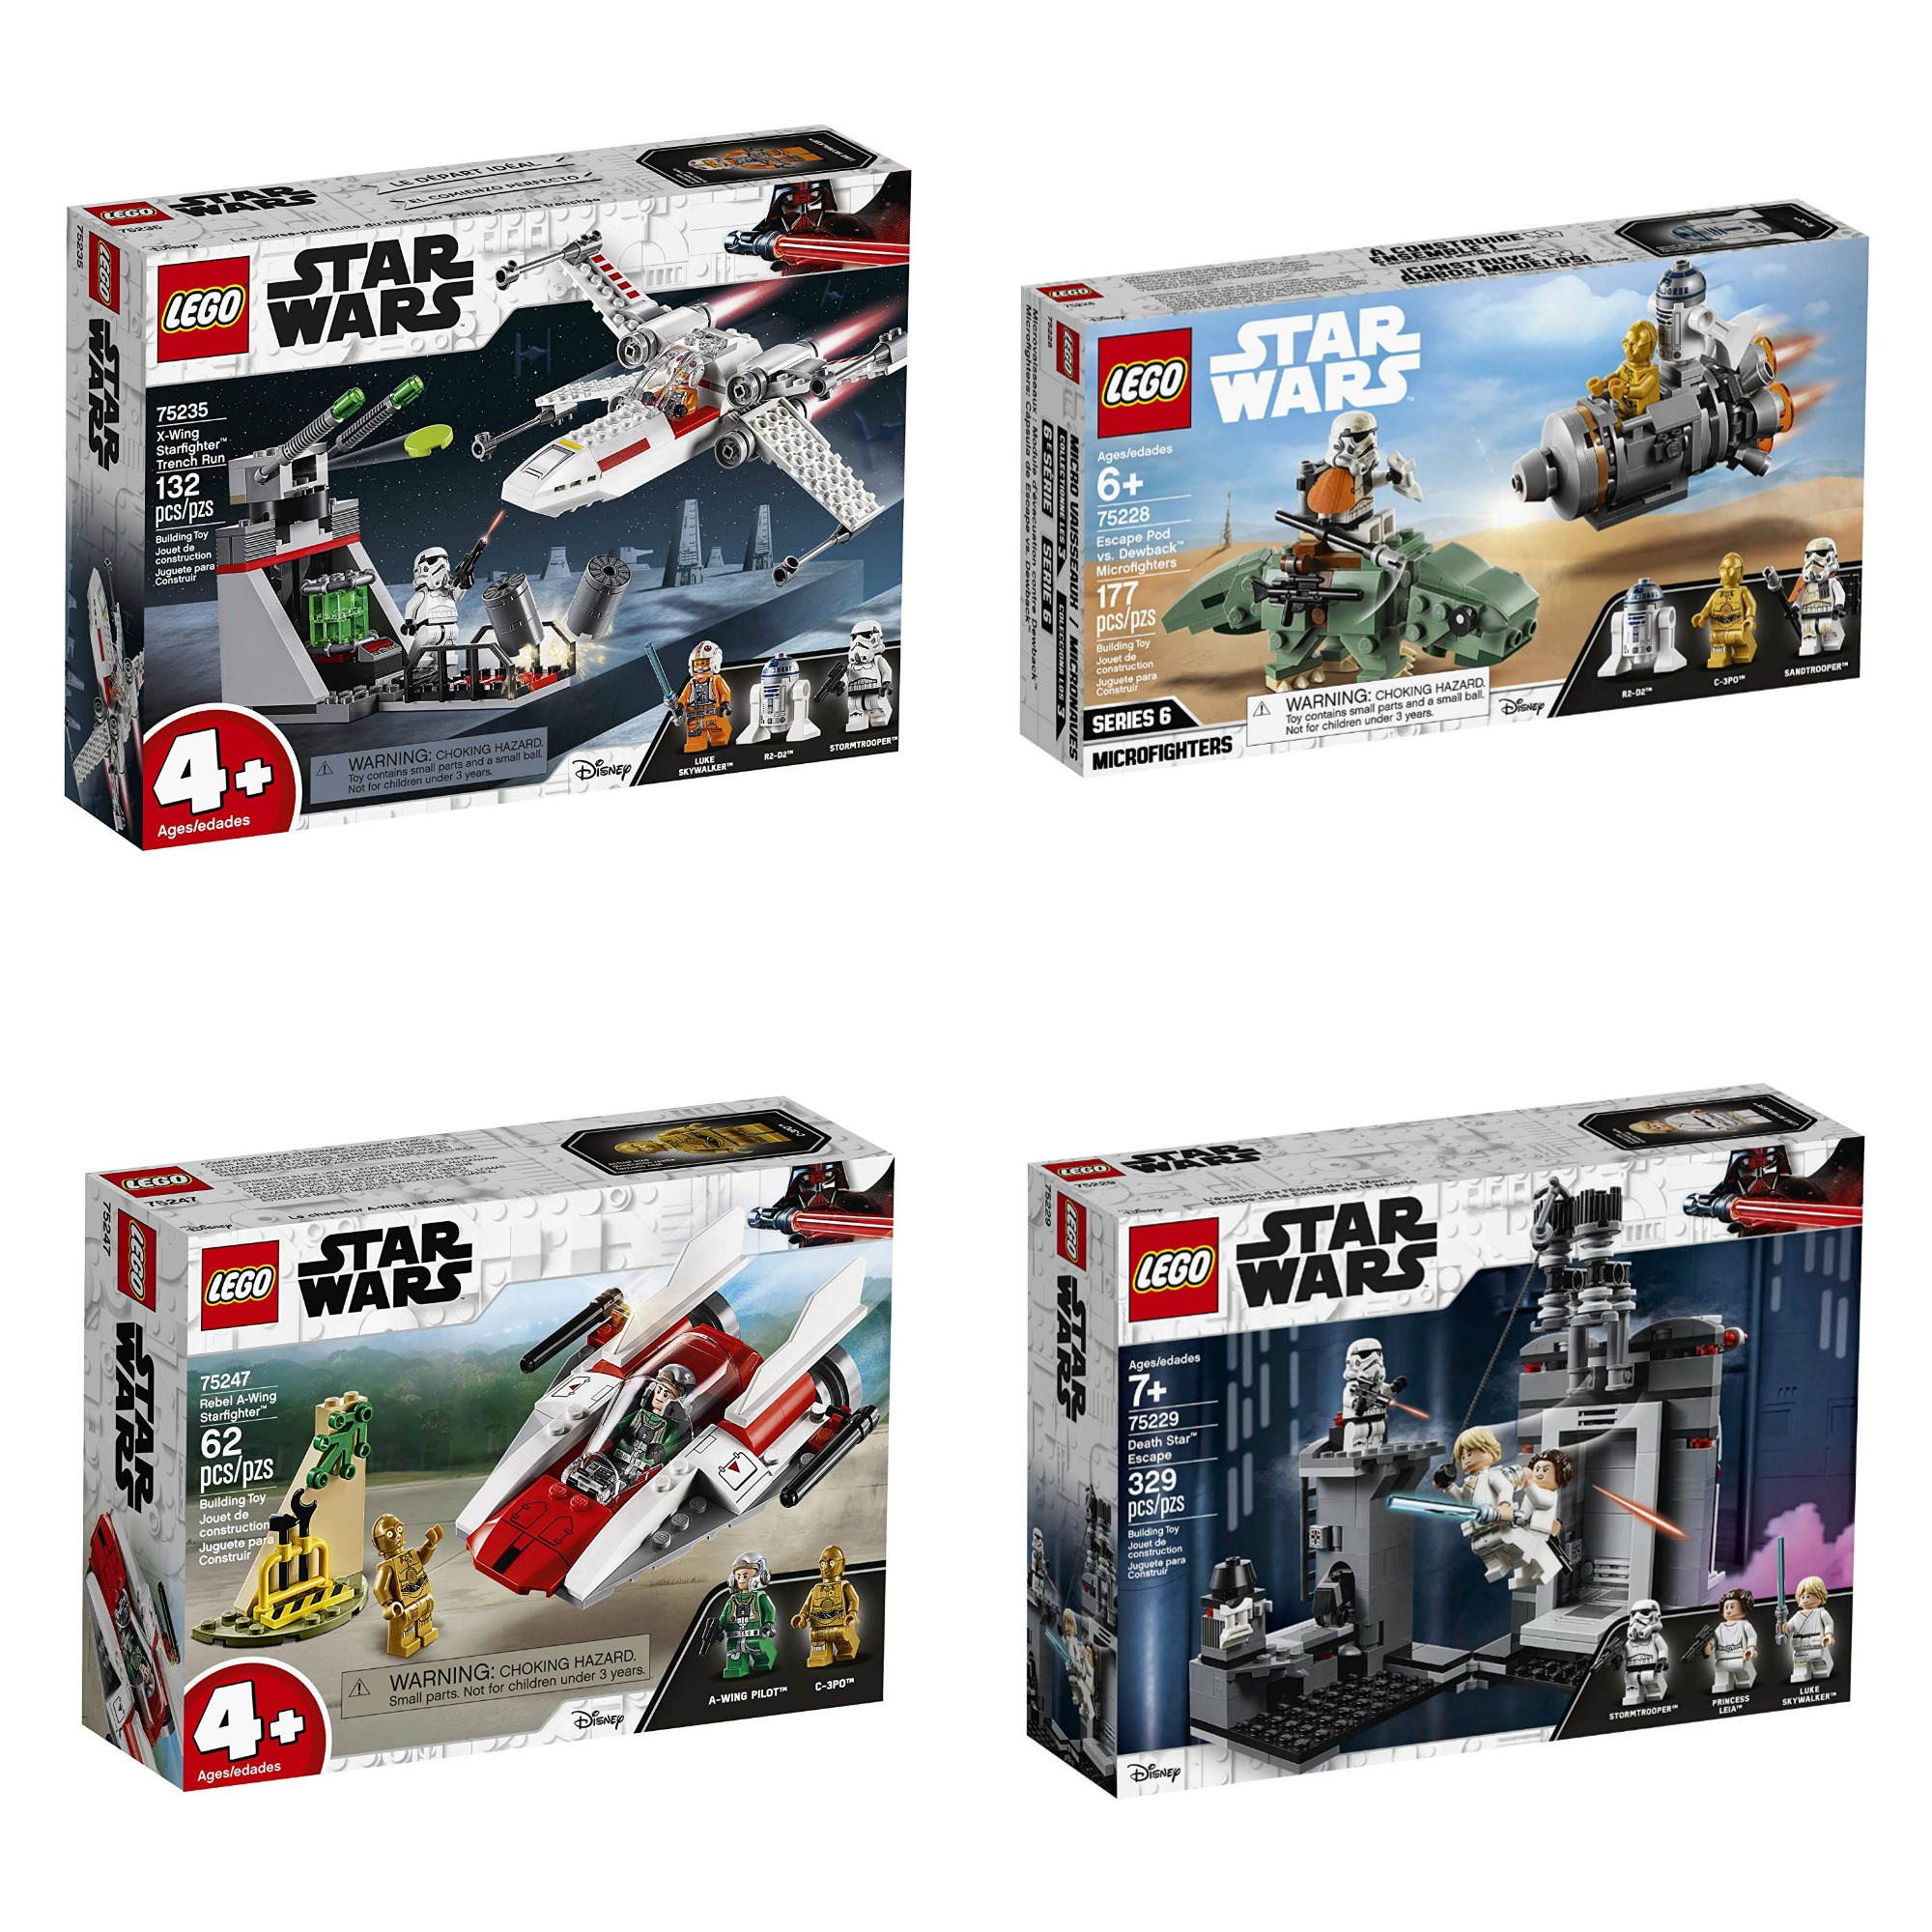 New 2019 LEGO Sets and LEGO Deals Amazon - Frugal Fun For Boys and Girls